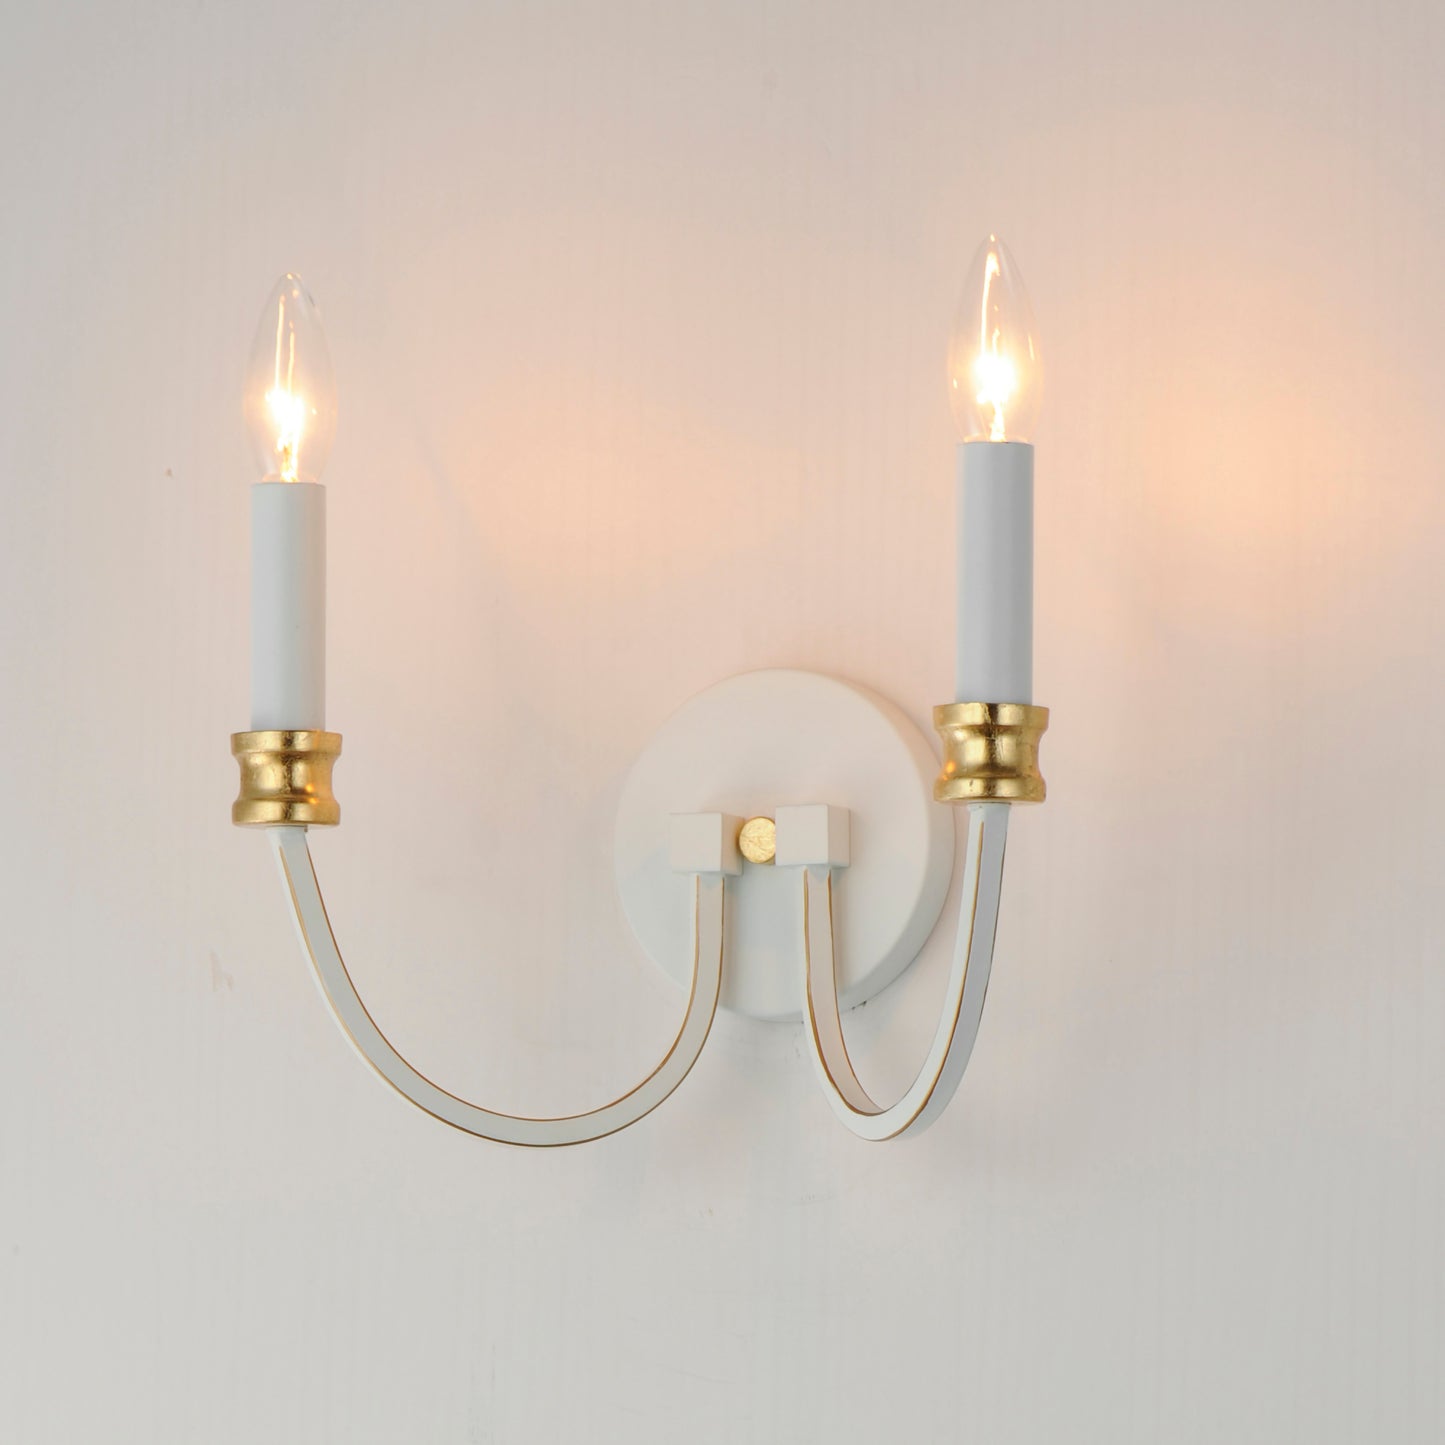 11372WWTGL - 2 Light Charlton 12" Wall Sconce - Weathered White/Gold Leaf